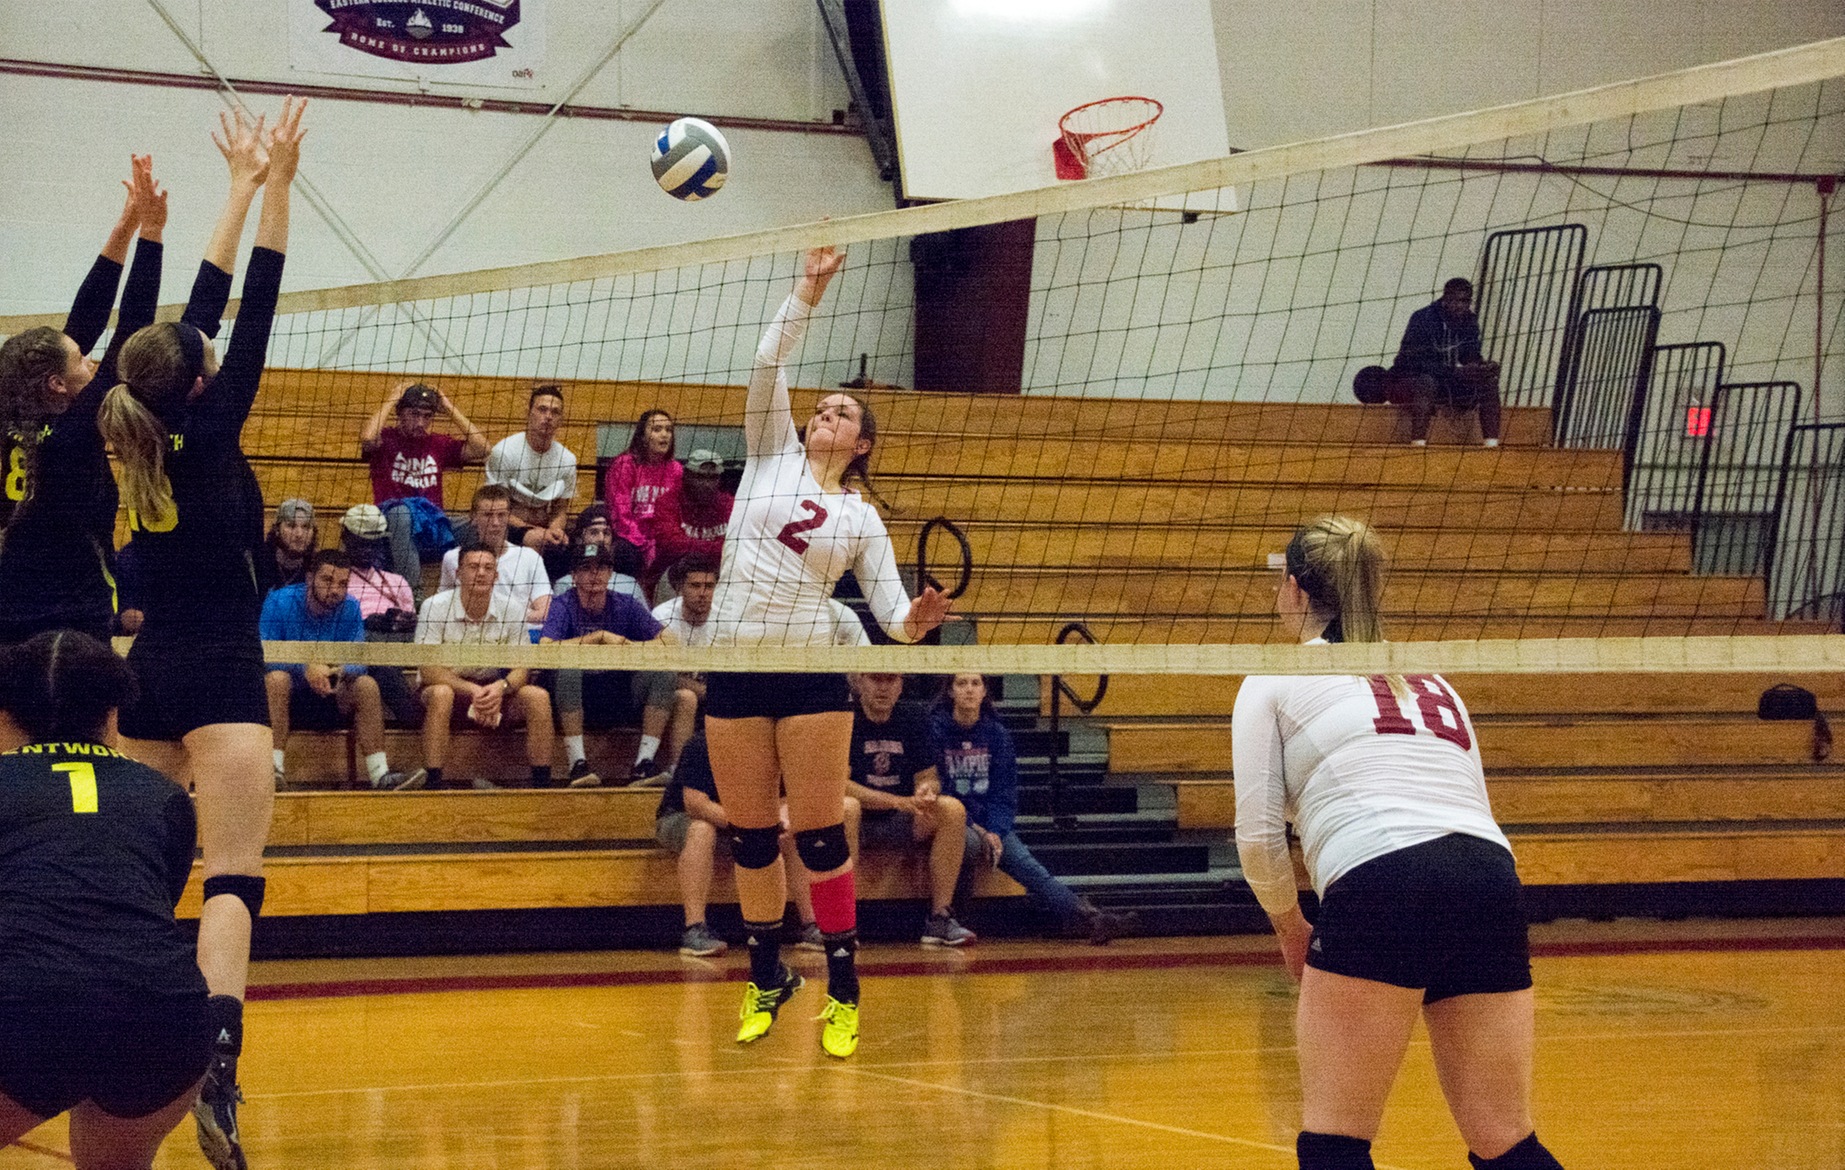 WOMEN’S VOLLEYBALL: Clark too strong for Anna Maria